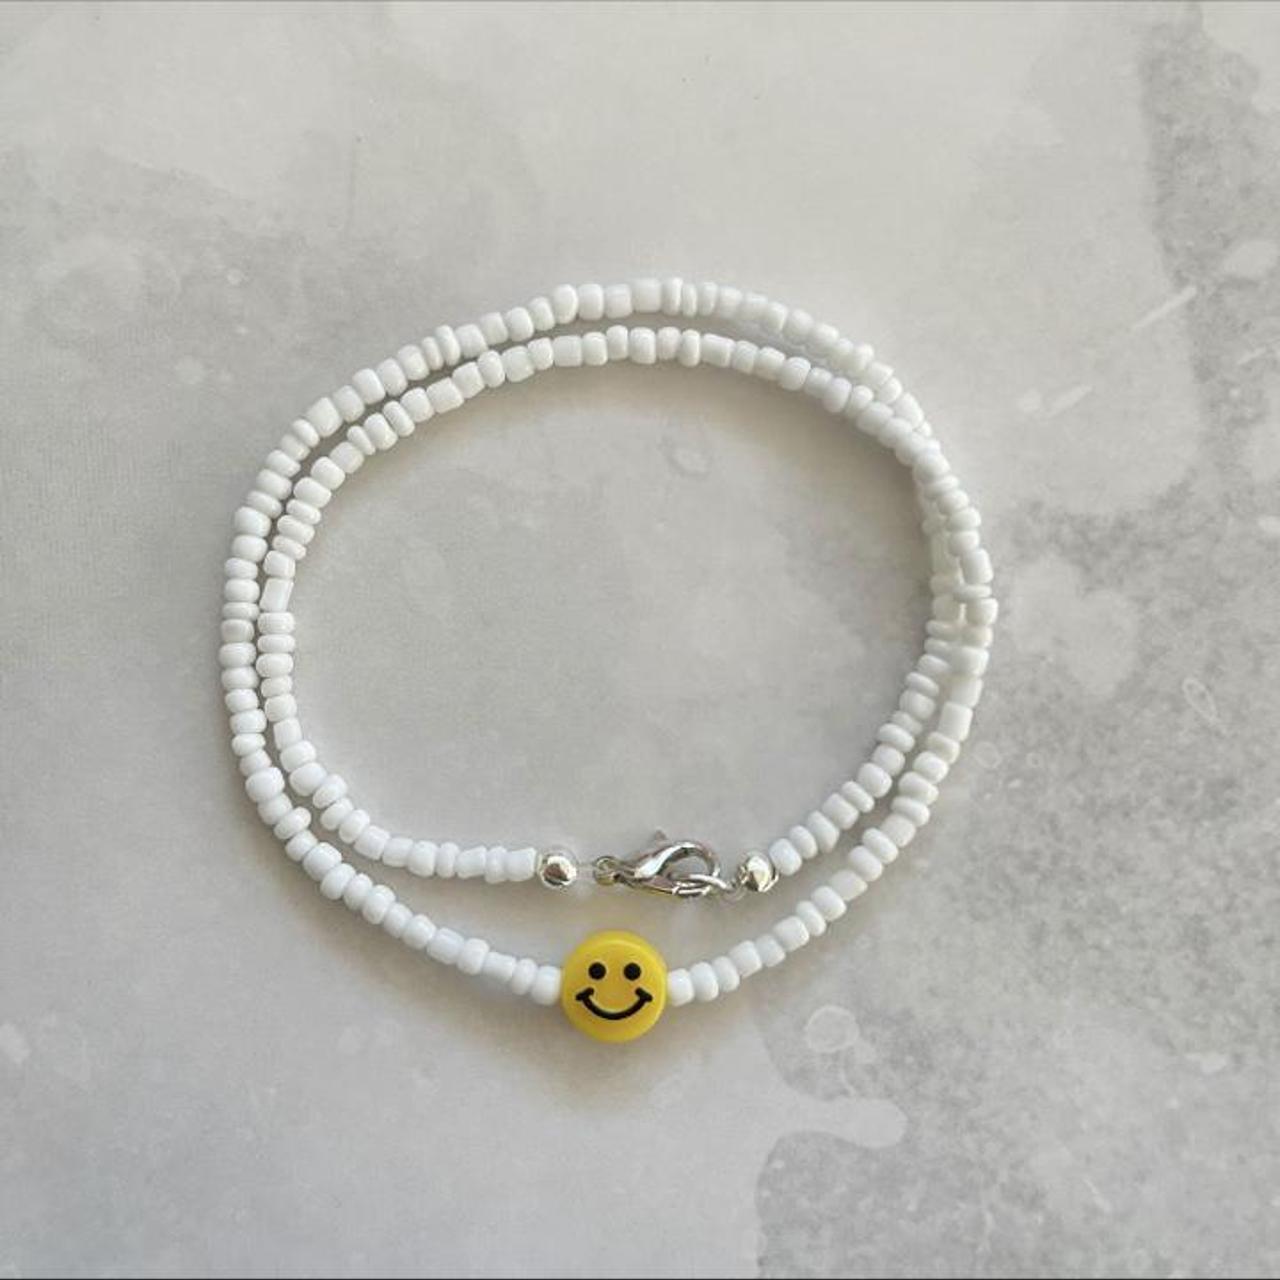 Product Image 1 - Smiley face beaded necklace
Gorgeous handmade